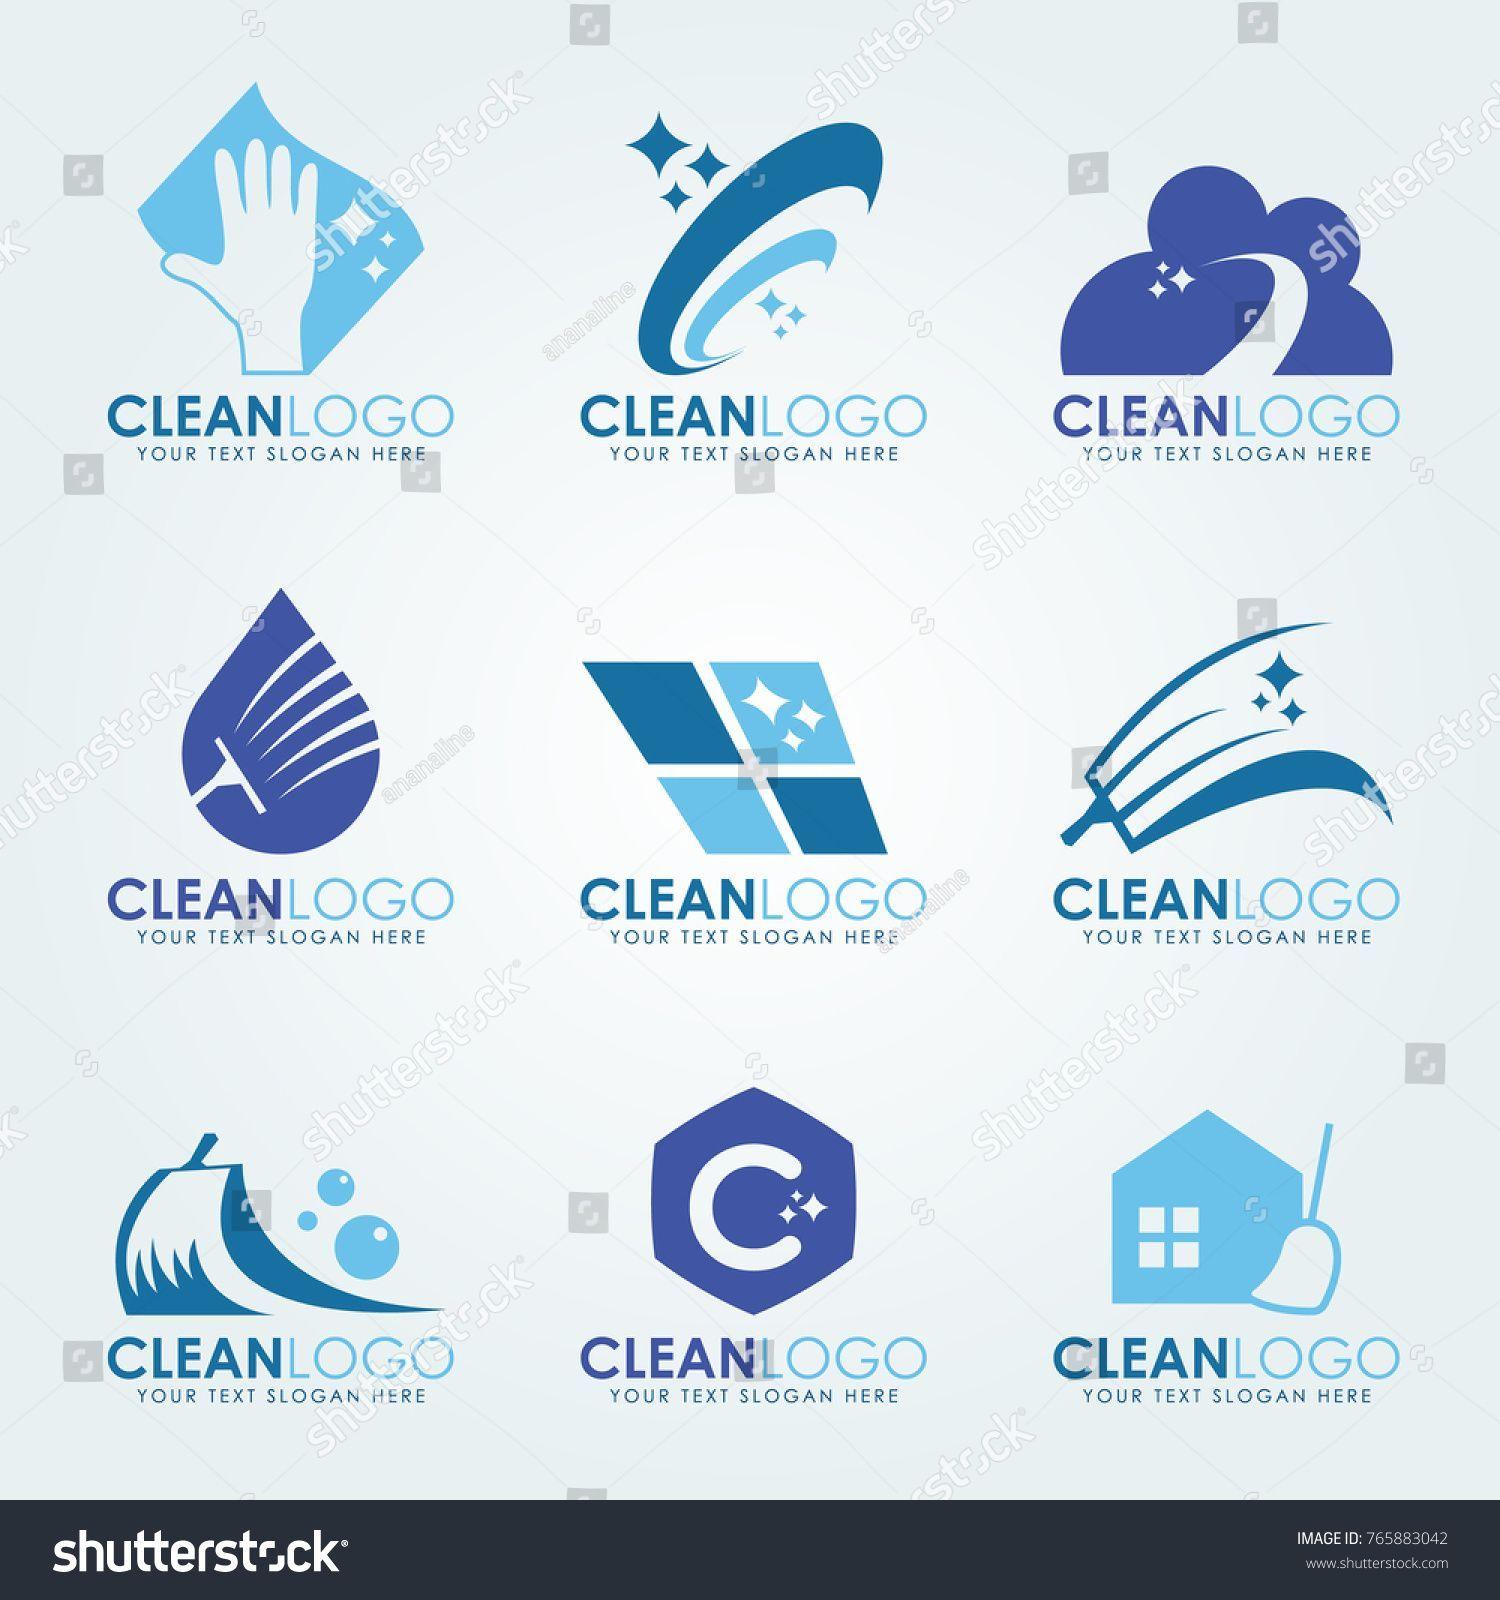 Broom Logo - Blue Clean logo with Cleaning gloves, water droplets, scrub brush